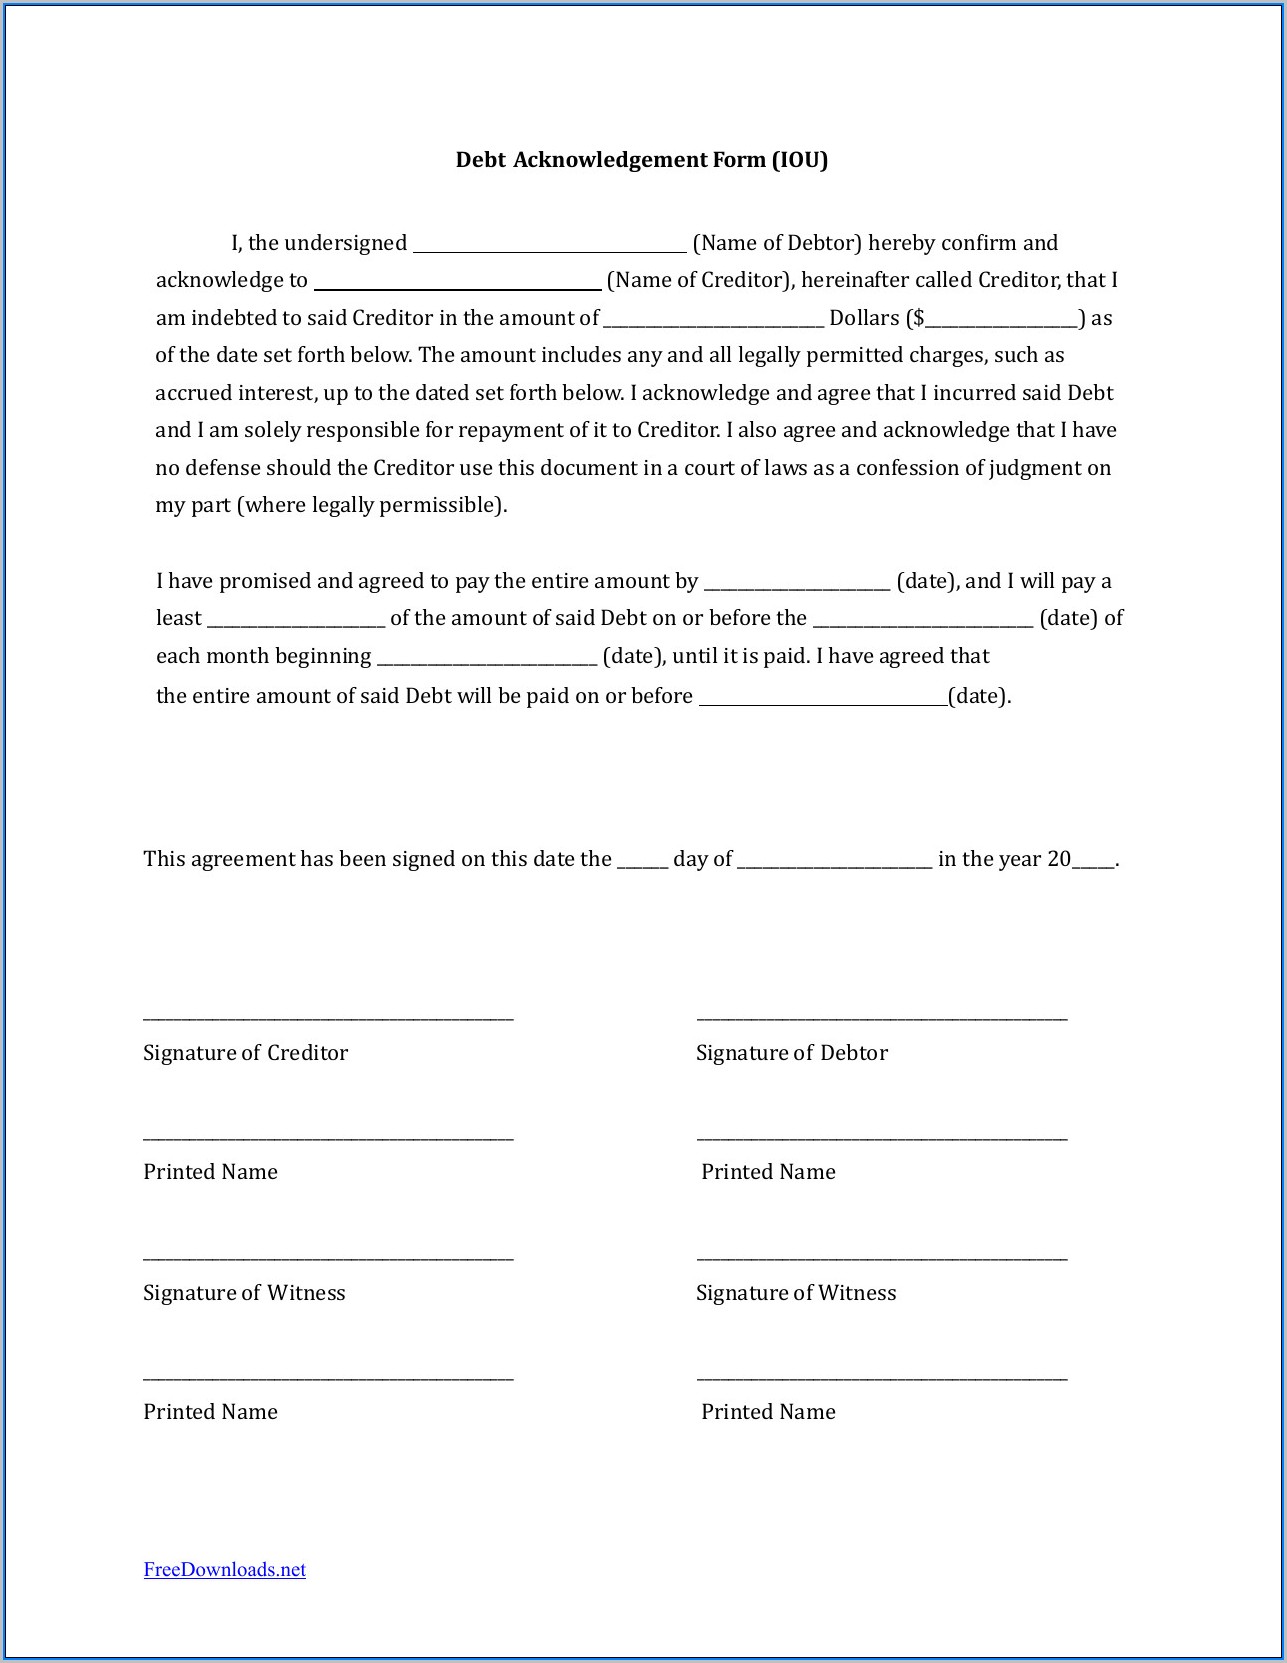 divorce-information-and-forms-arkansas-free-download